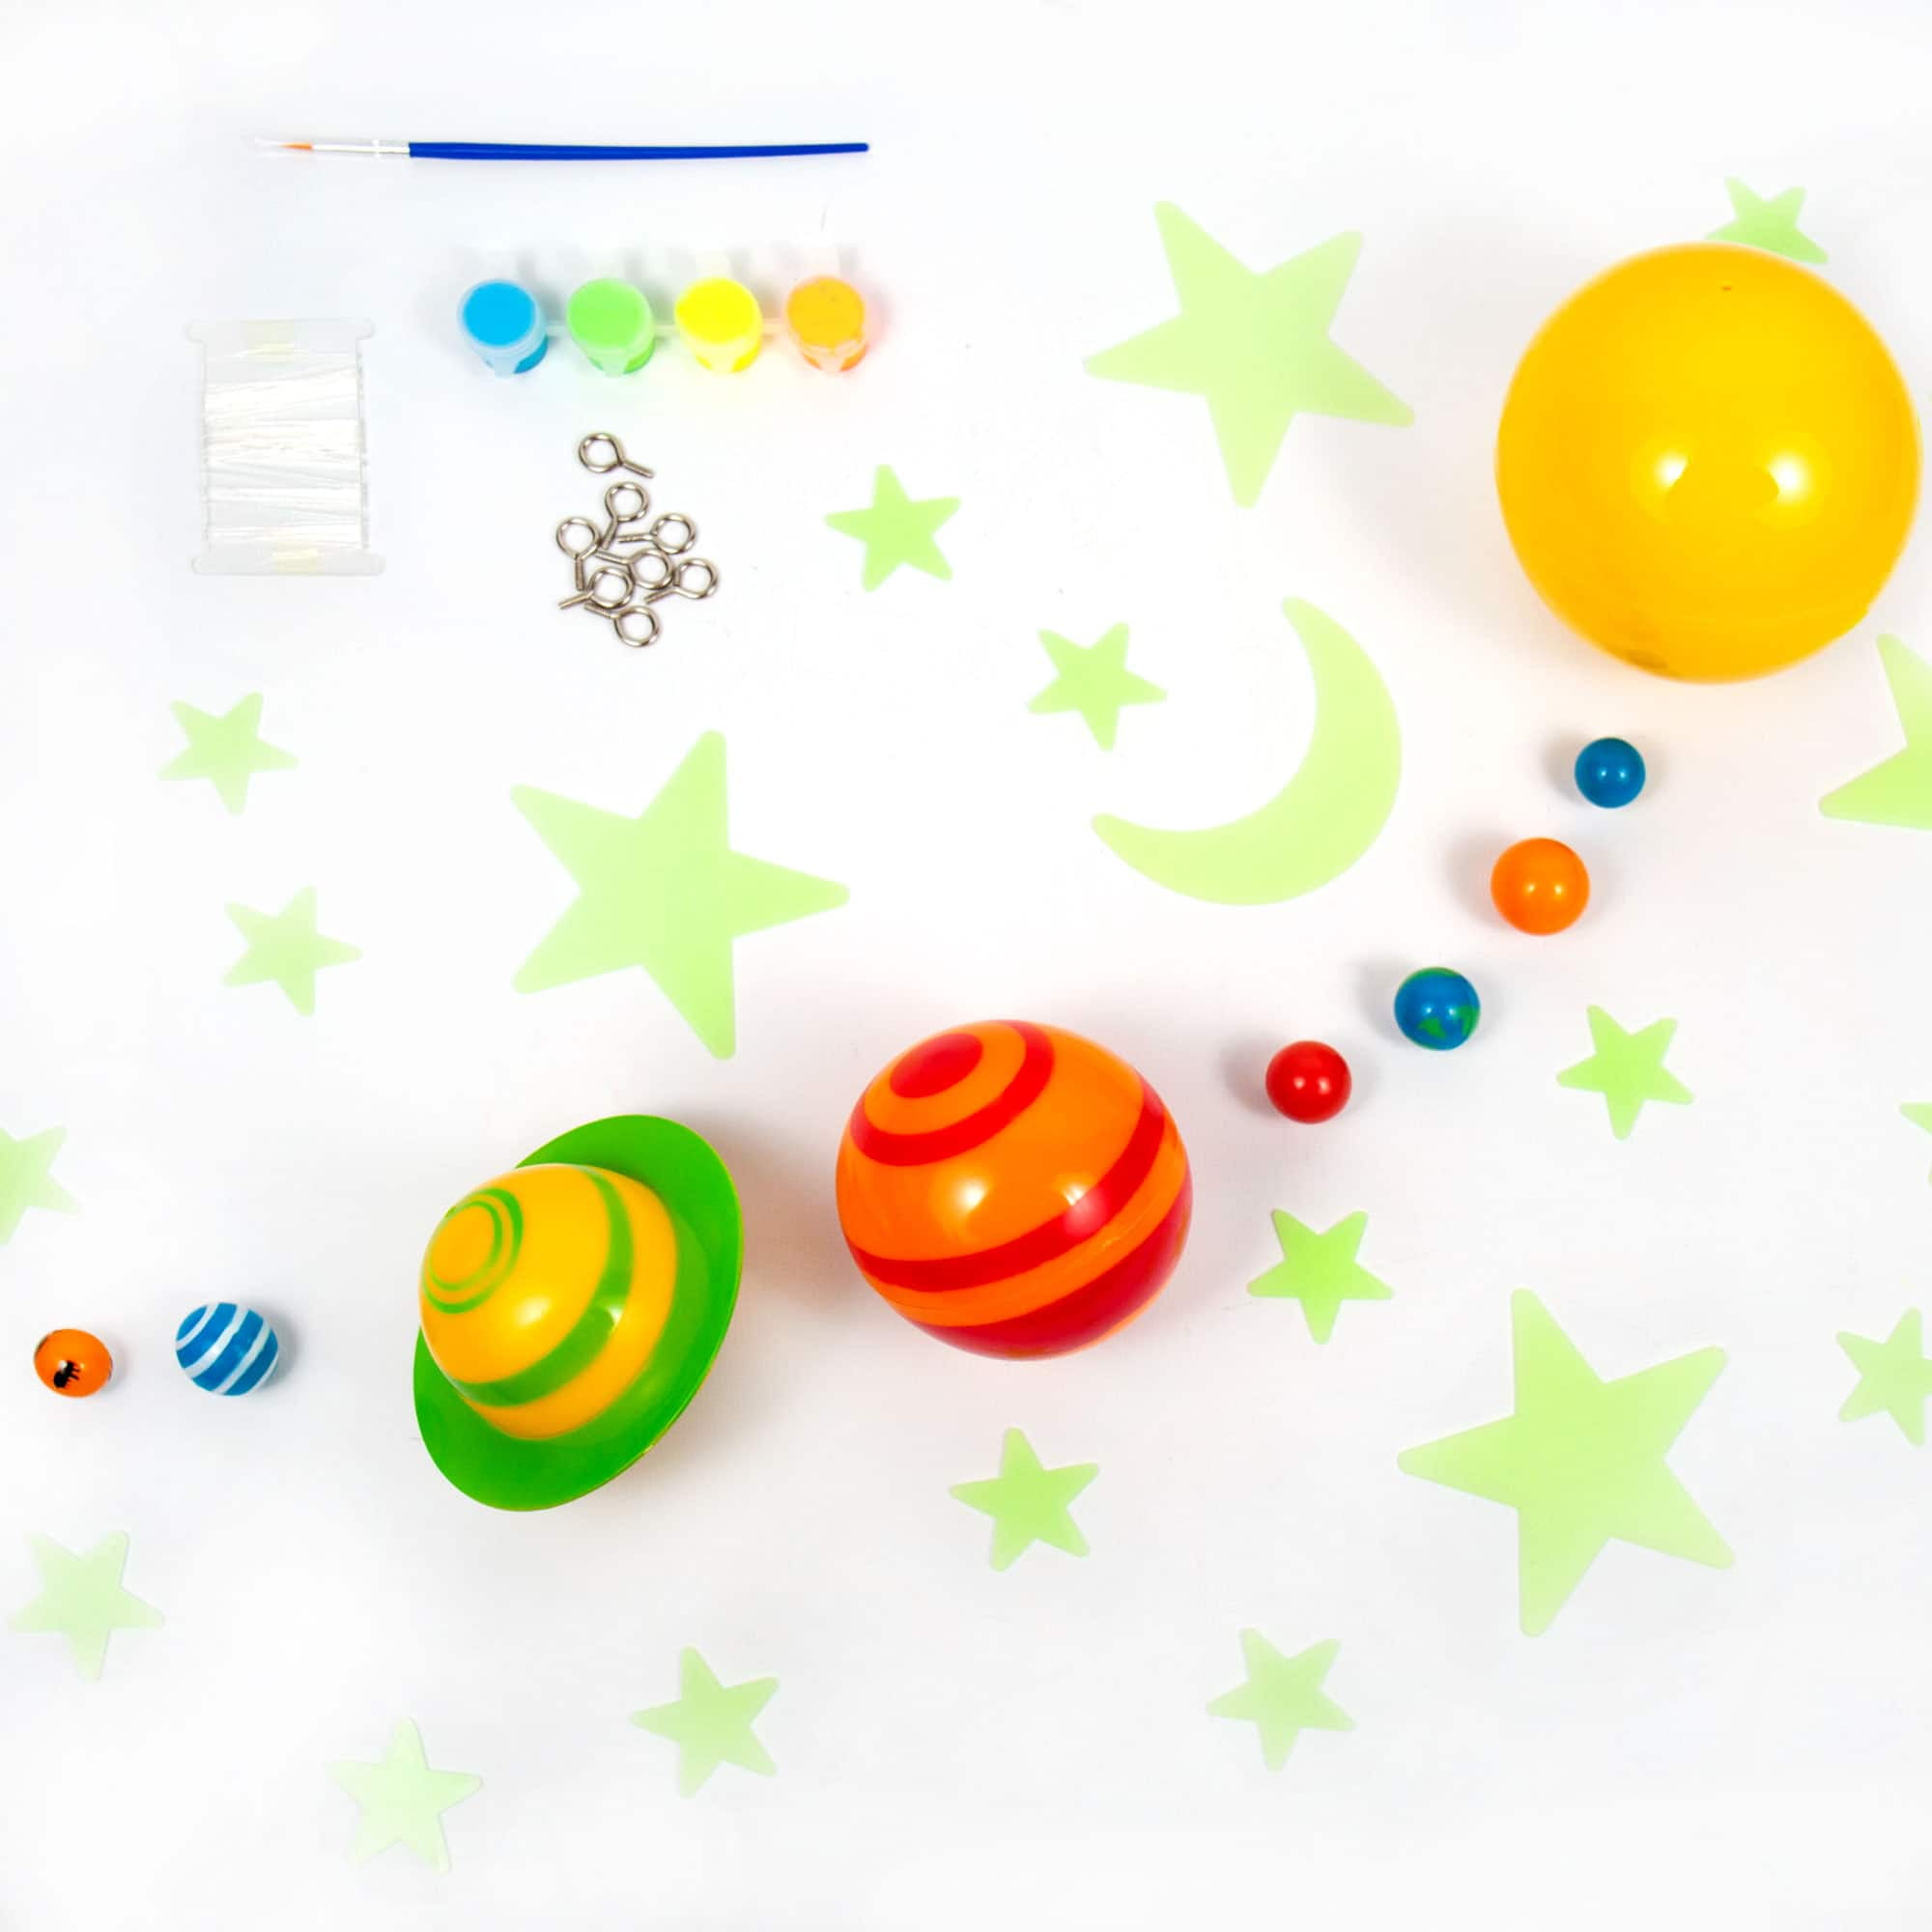 Universe Solar System Match with Cards Stress Ball Set